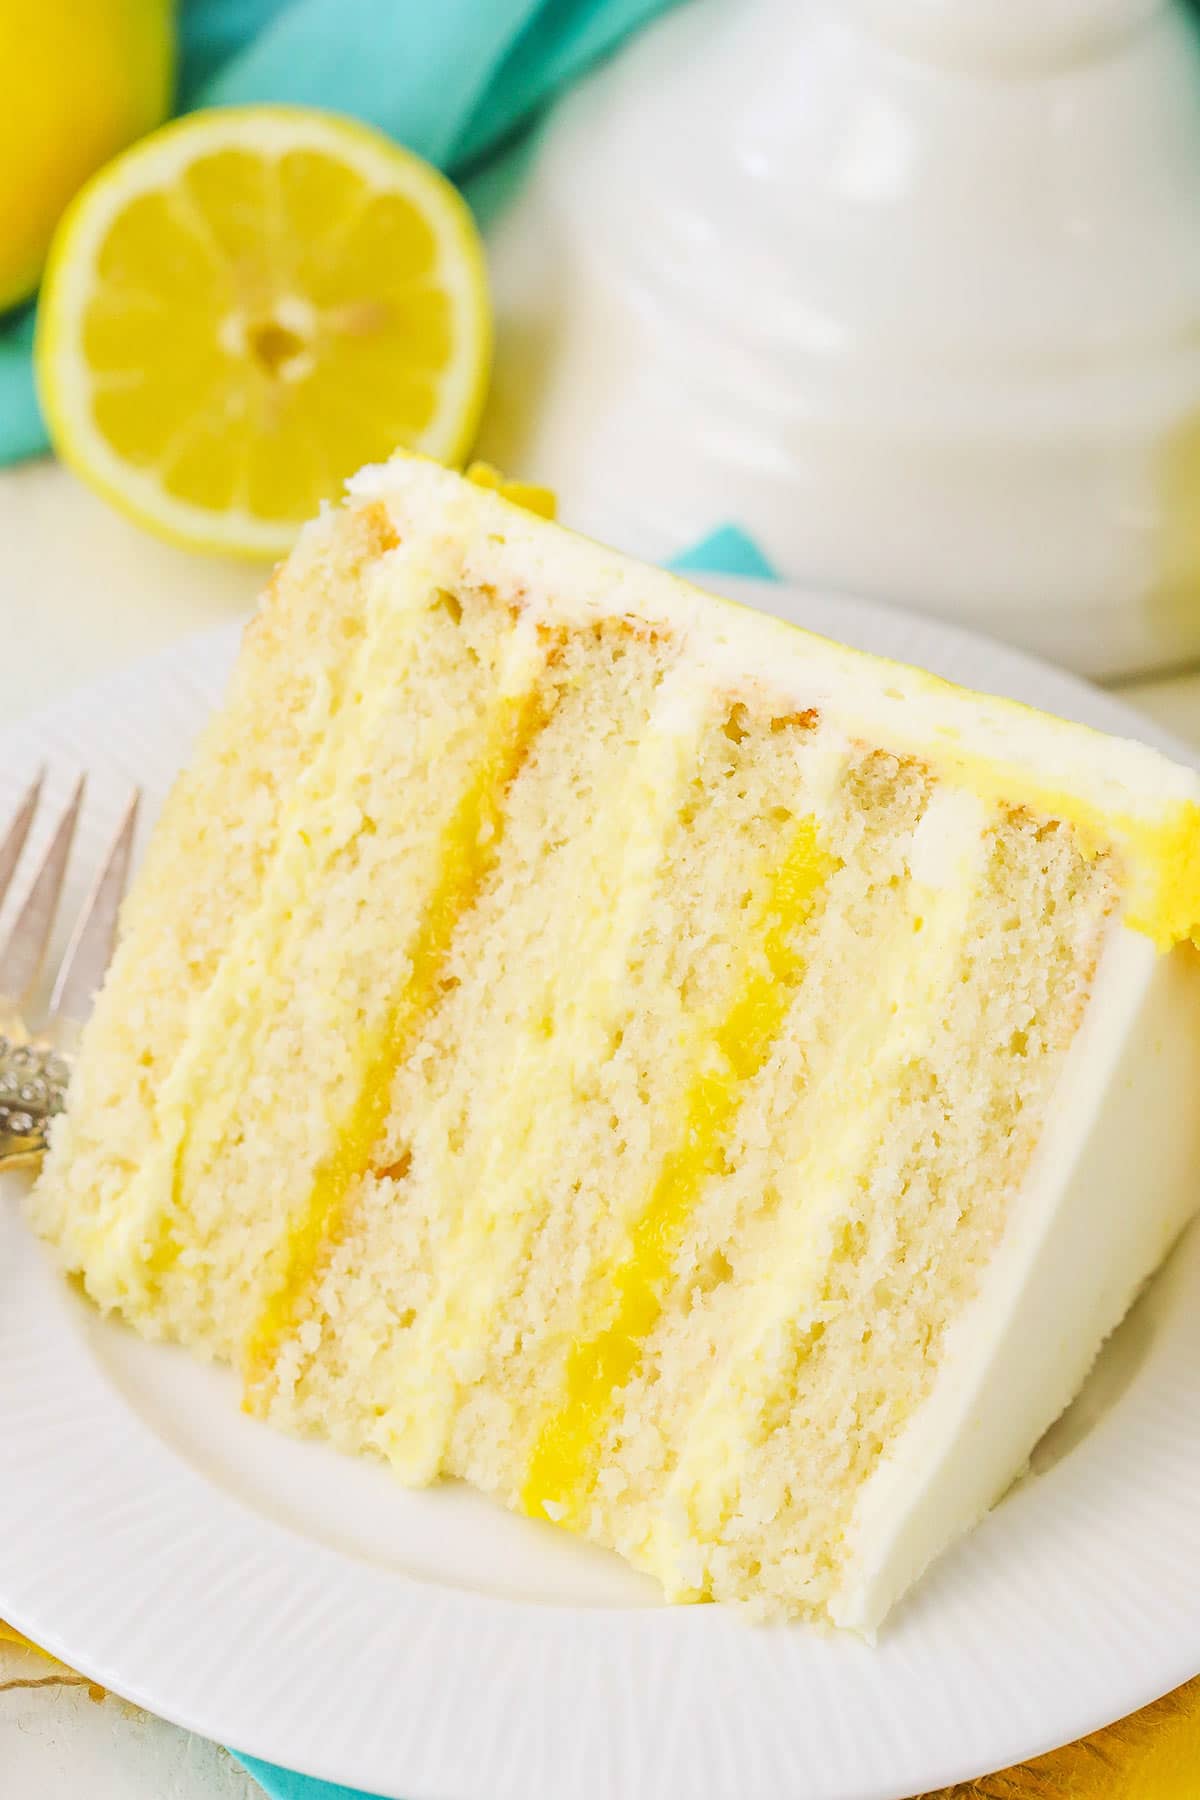 A Big Slice of Summer Citrus Cake on a White Plate with Half a Lemon Behind it